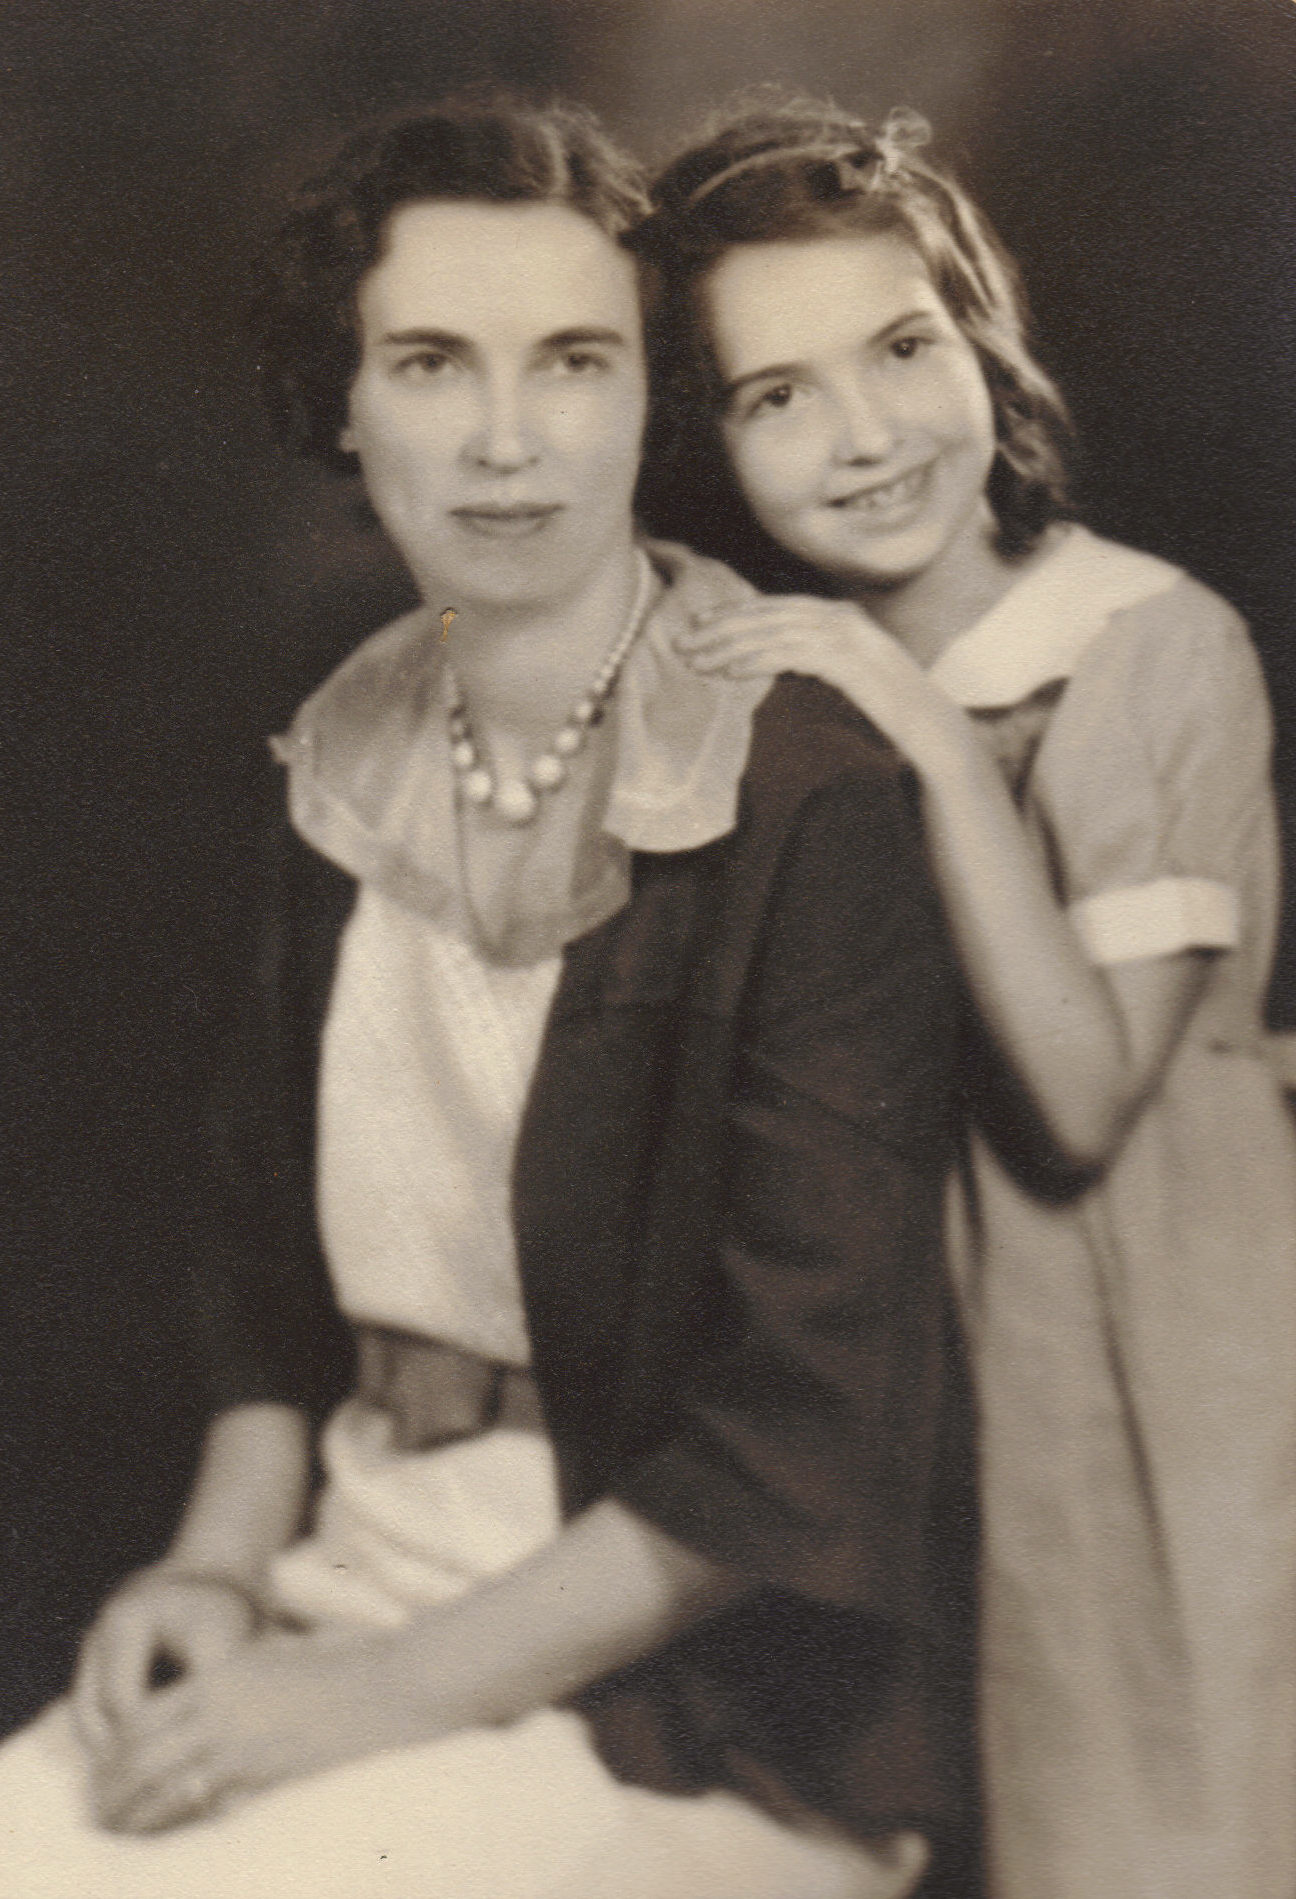 A black and white photo of a seated woman, Lyla Haynes and her daughter Joan who is standing behind her with an arm on her shoulder.